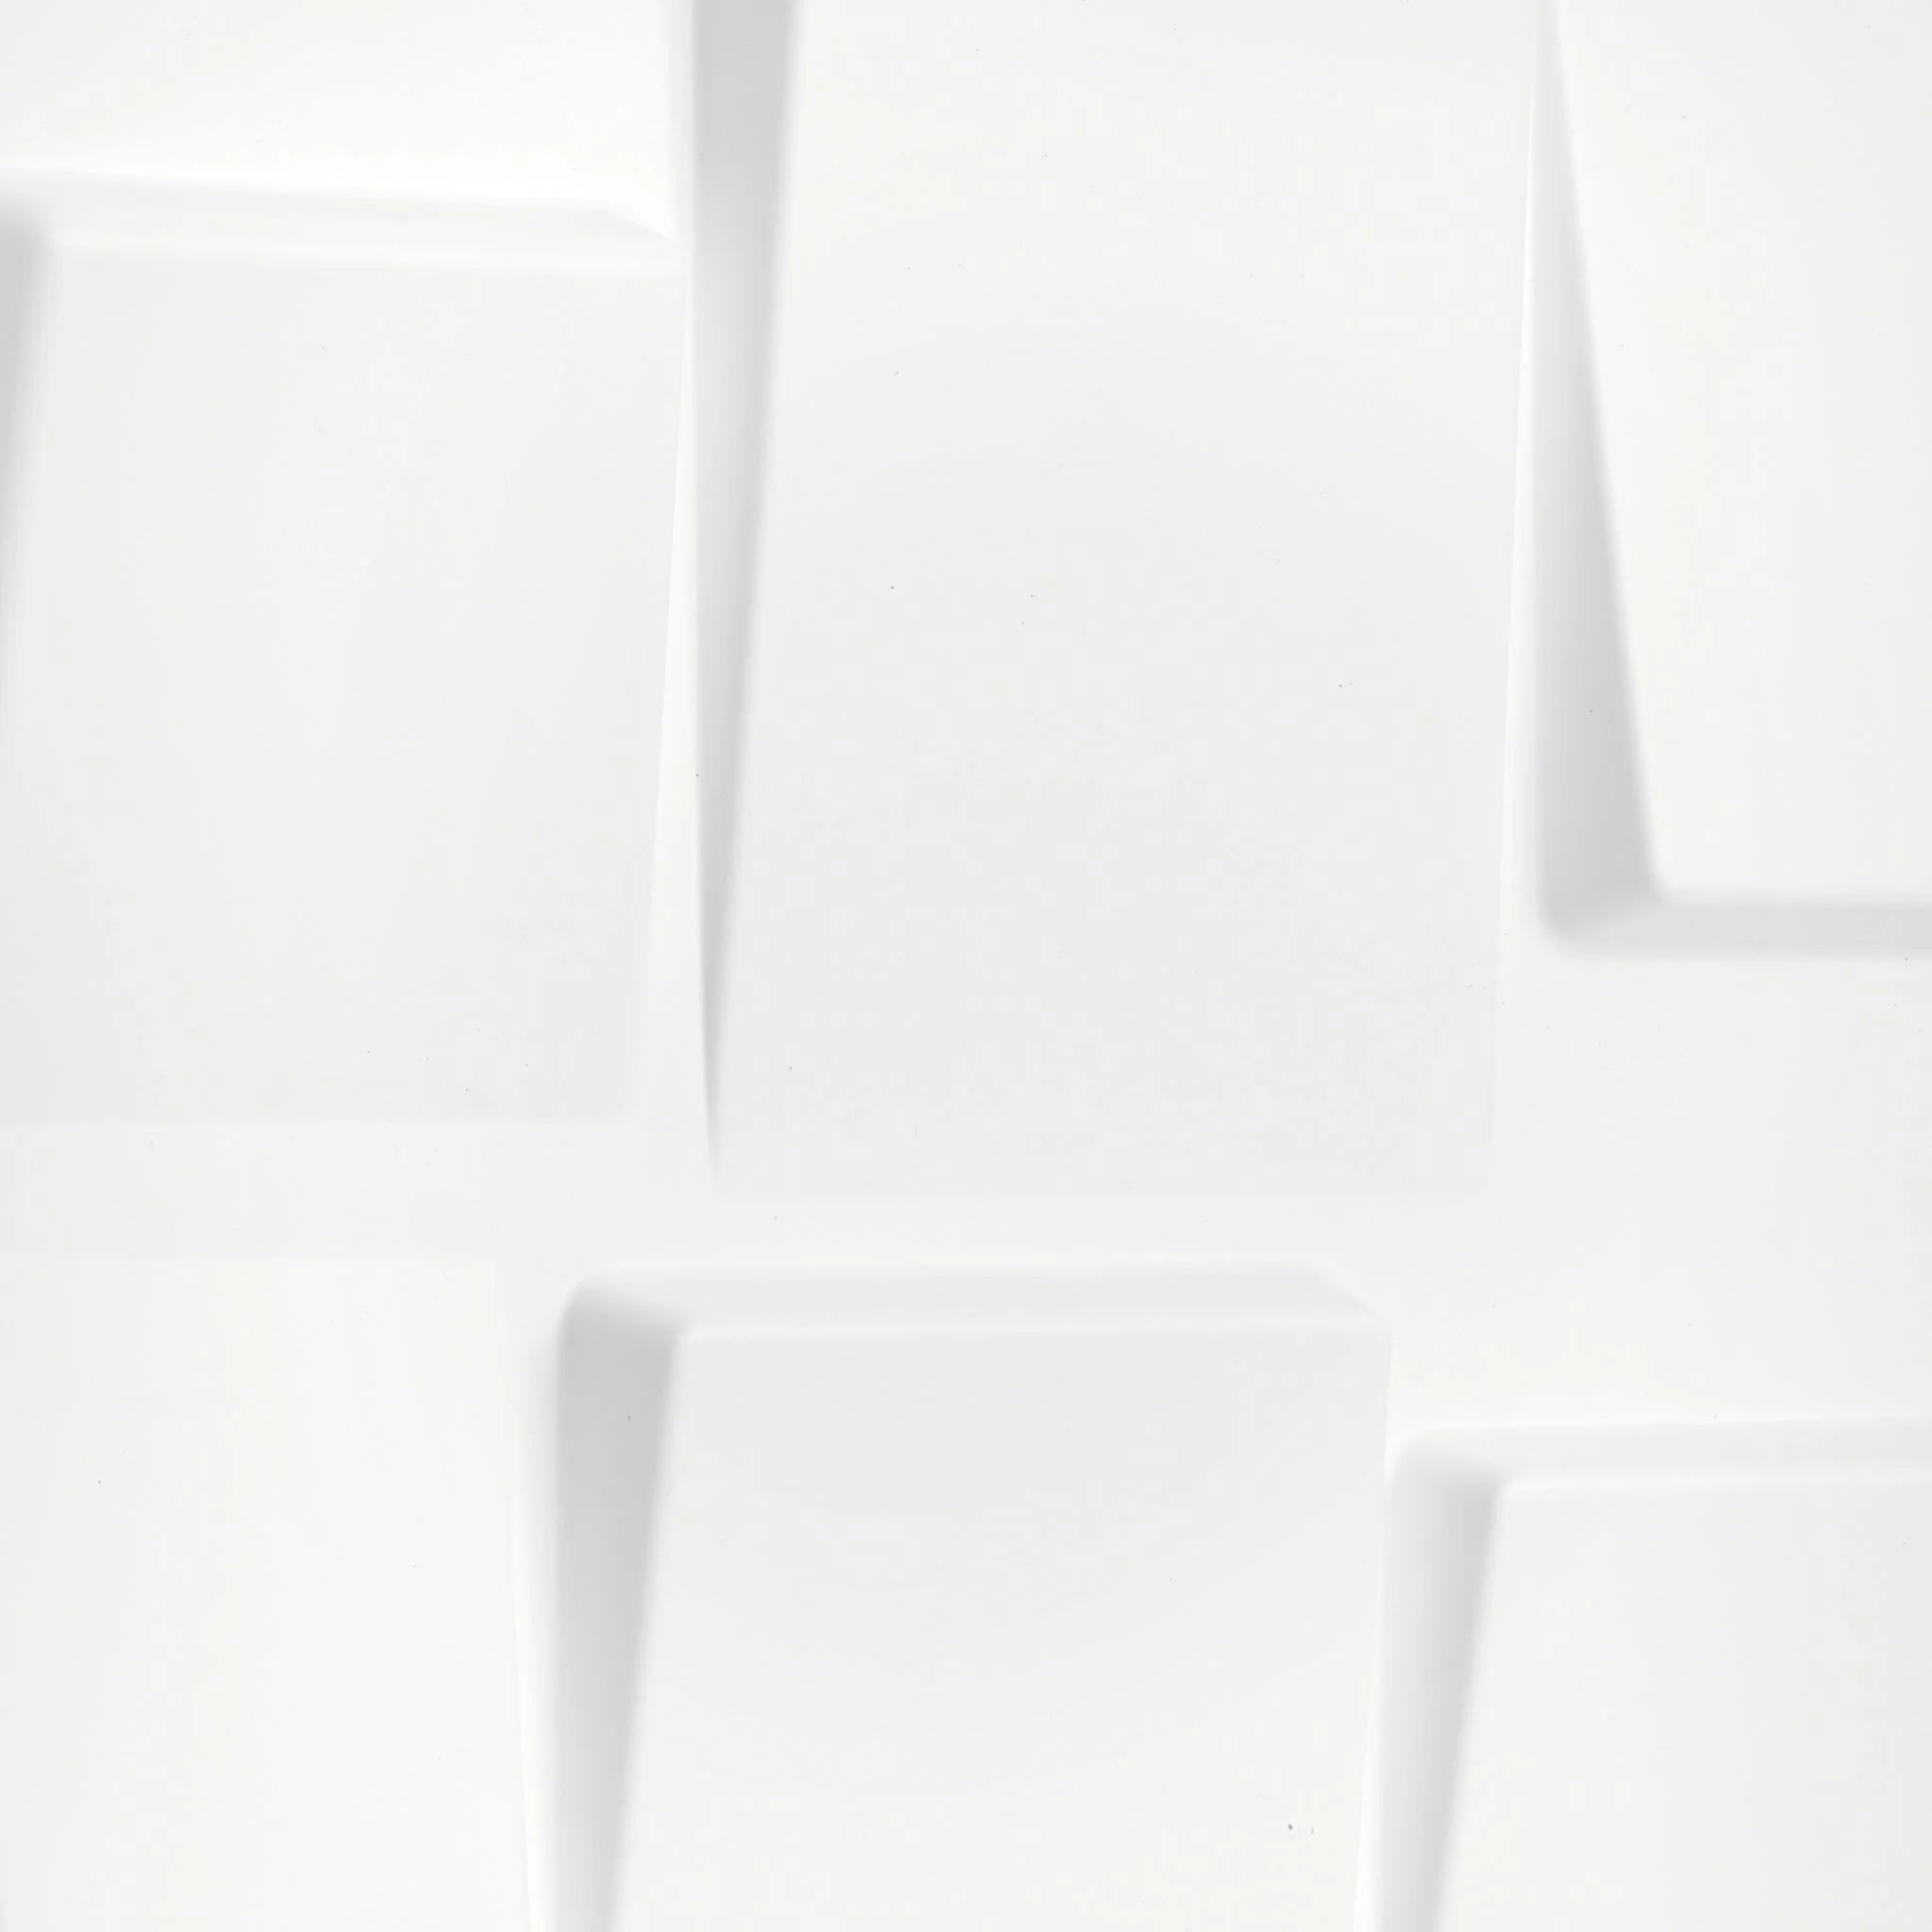 Close-up of white PVC wall panel with geometric shapes